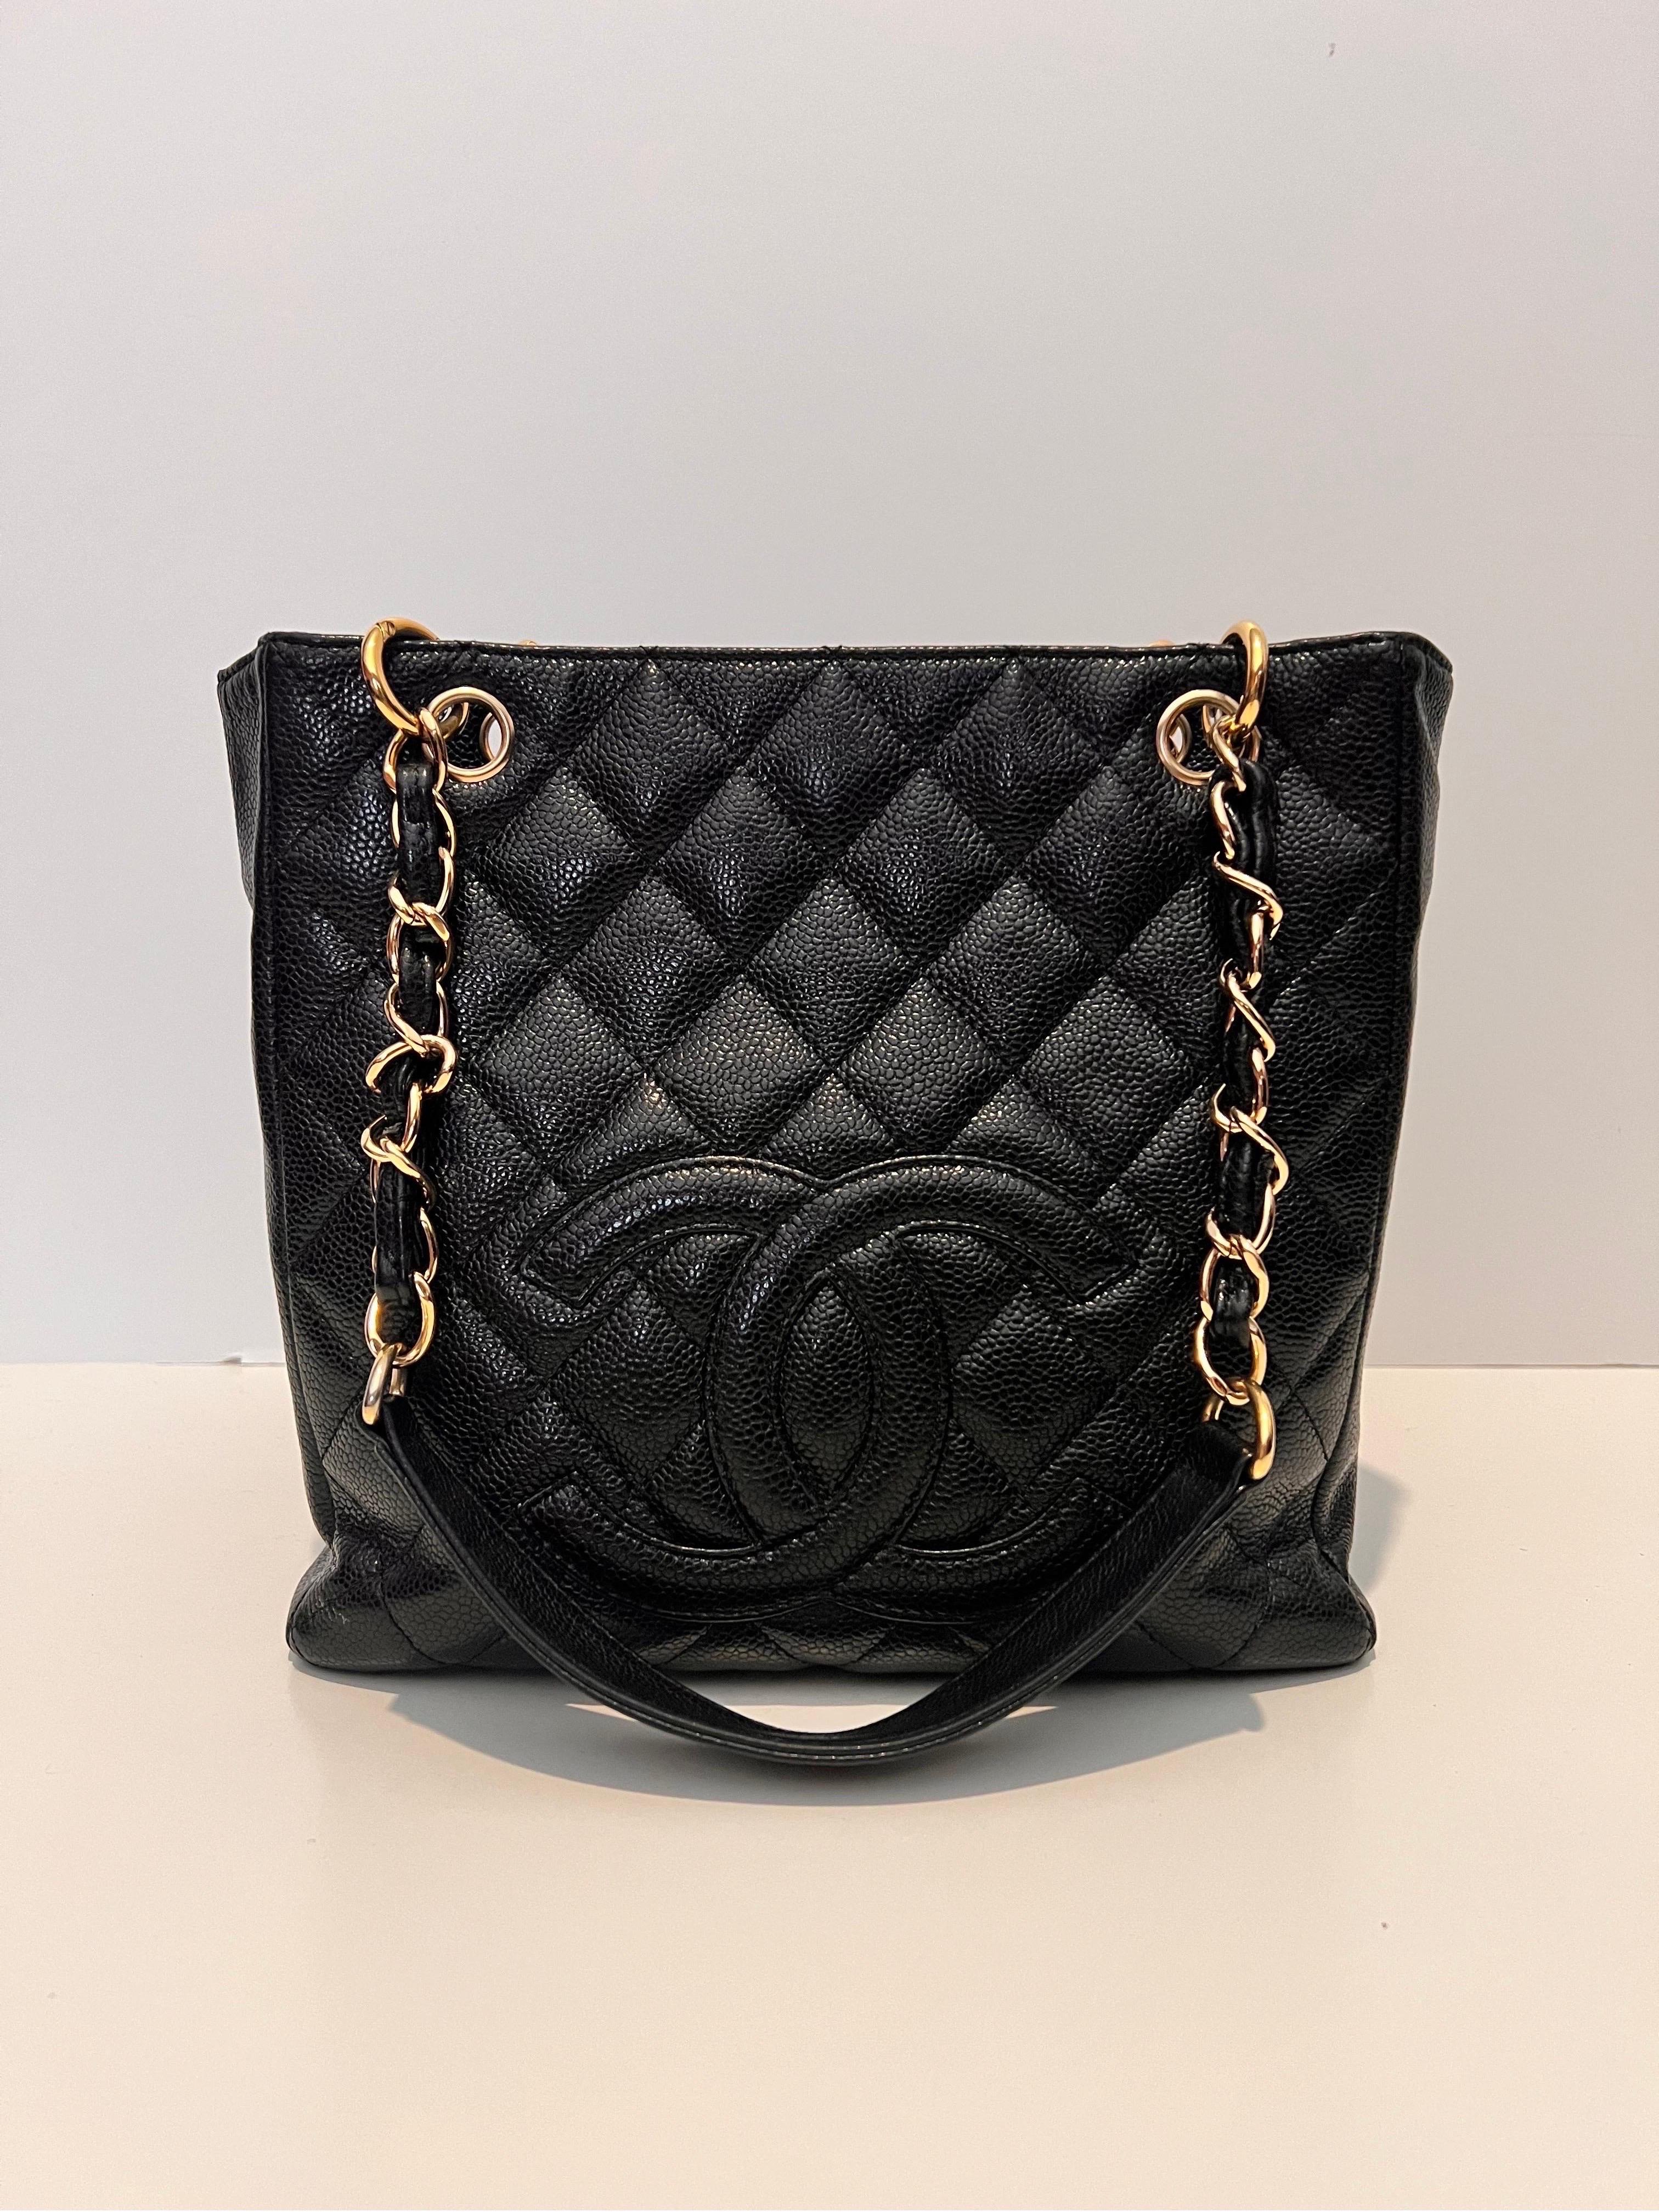 Women's or Men's Chanel Black Quilted Caviar Leather Grand Shopping Tote